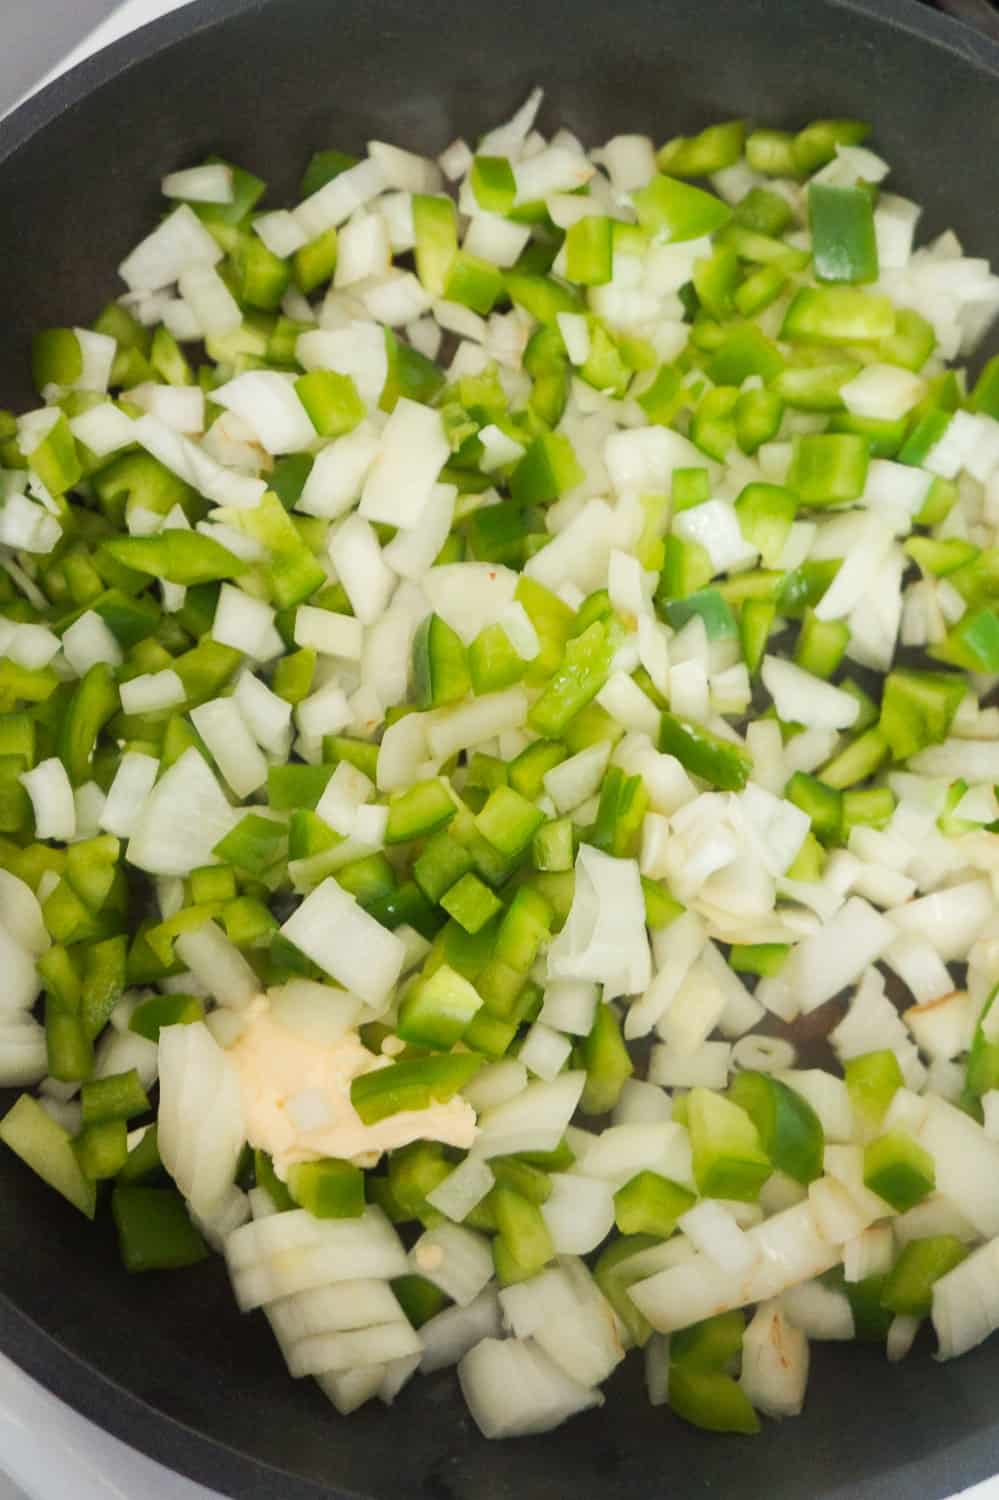 diced onions and diced green peppers in a frying pan